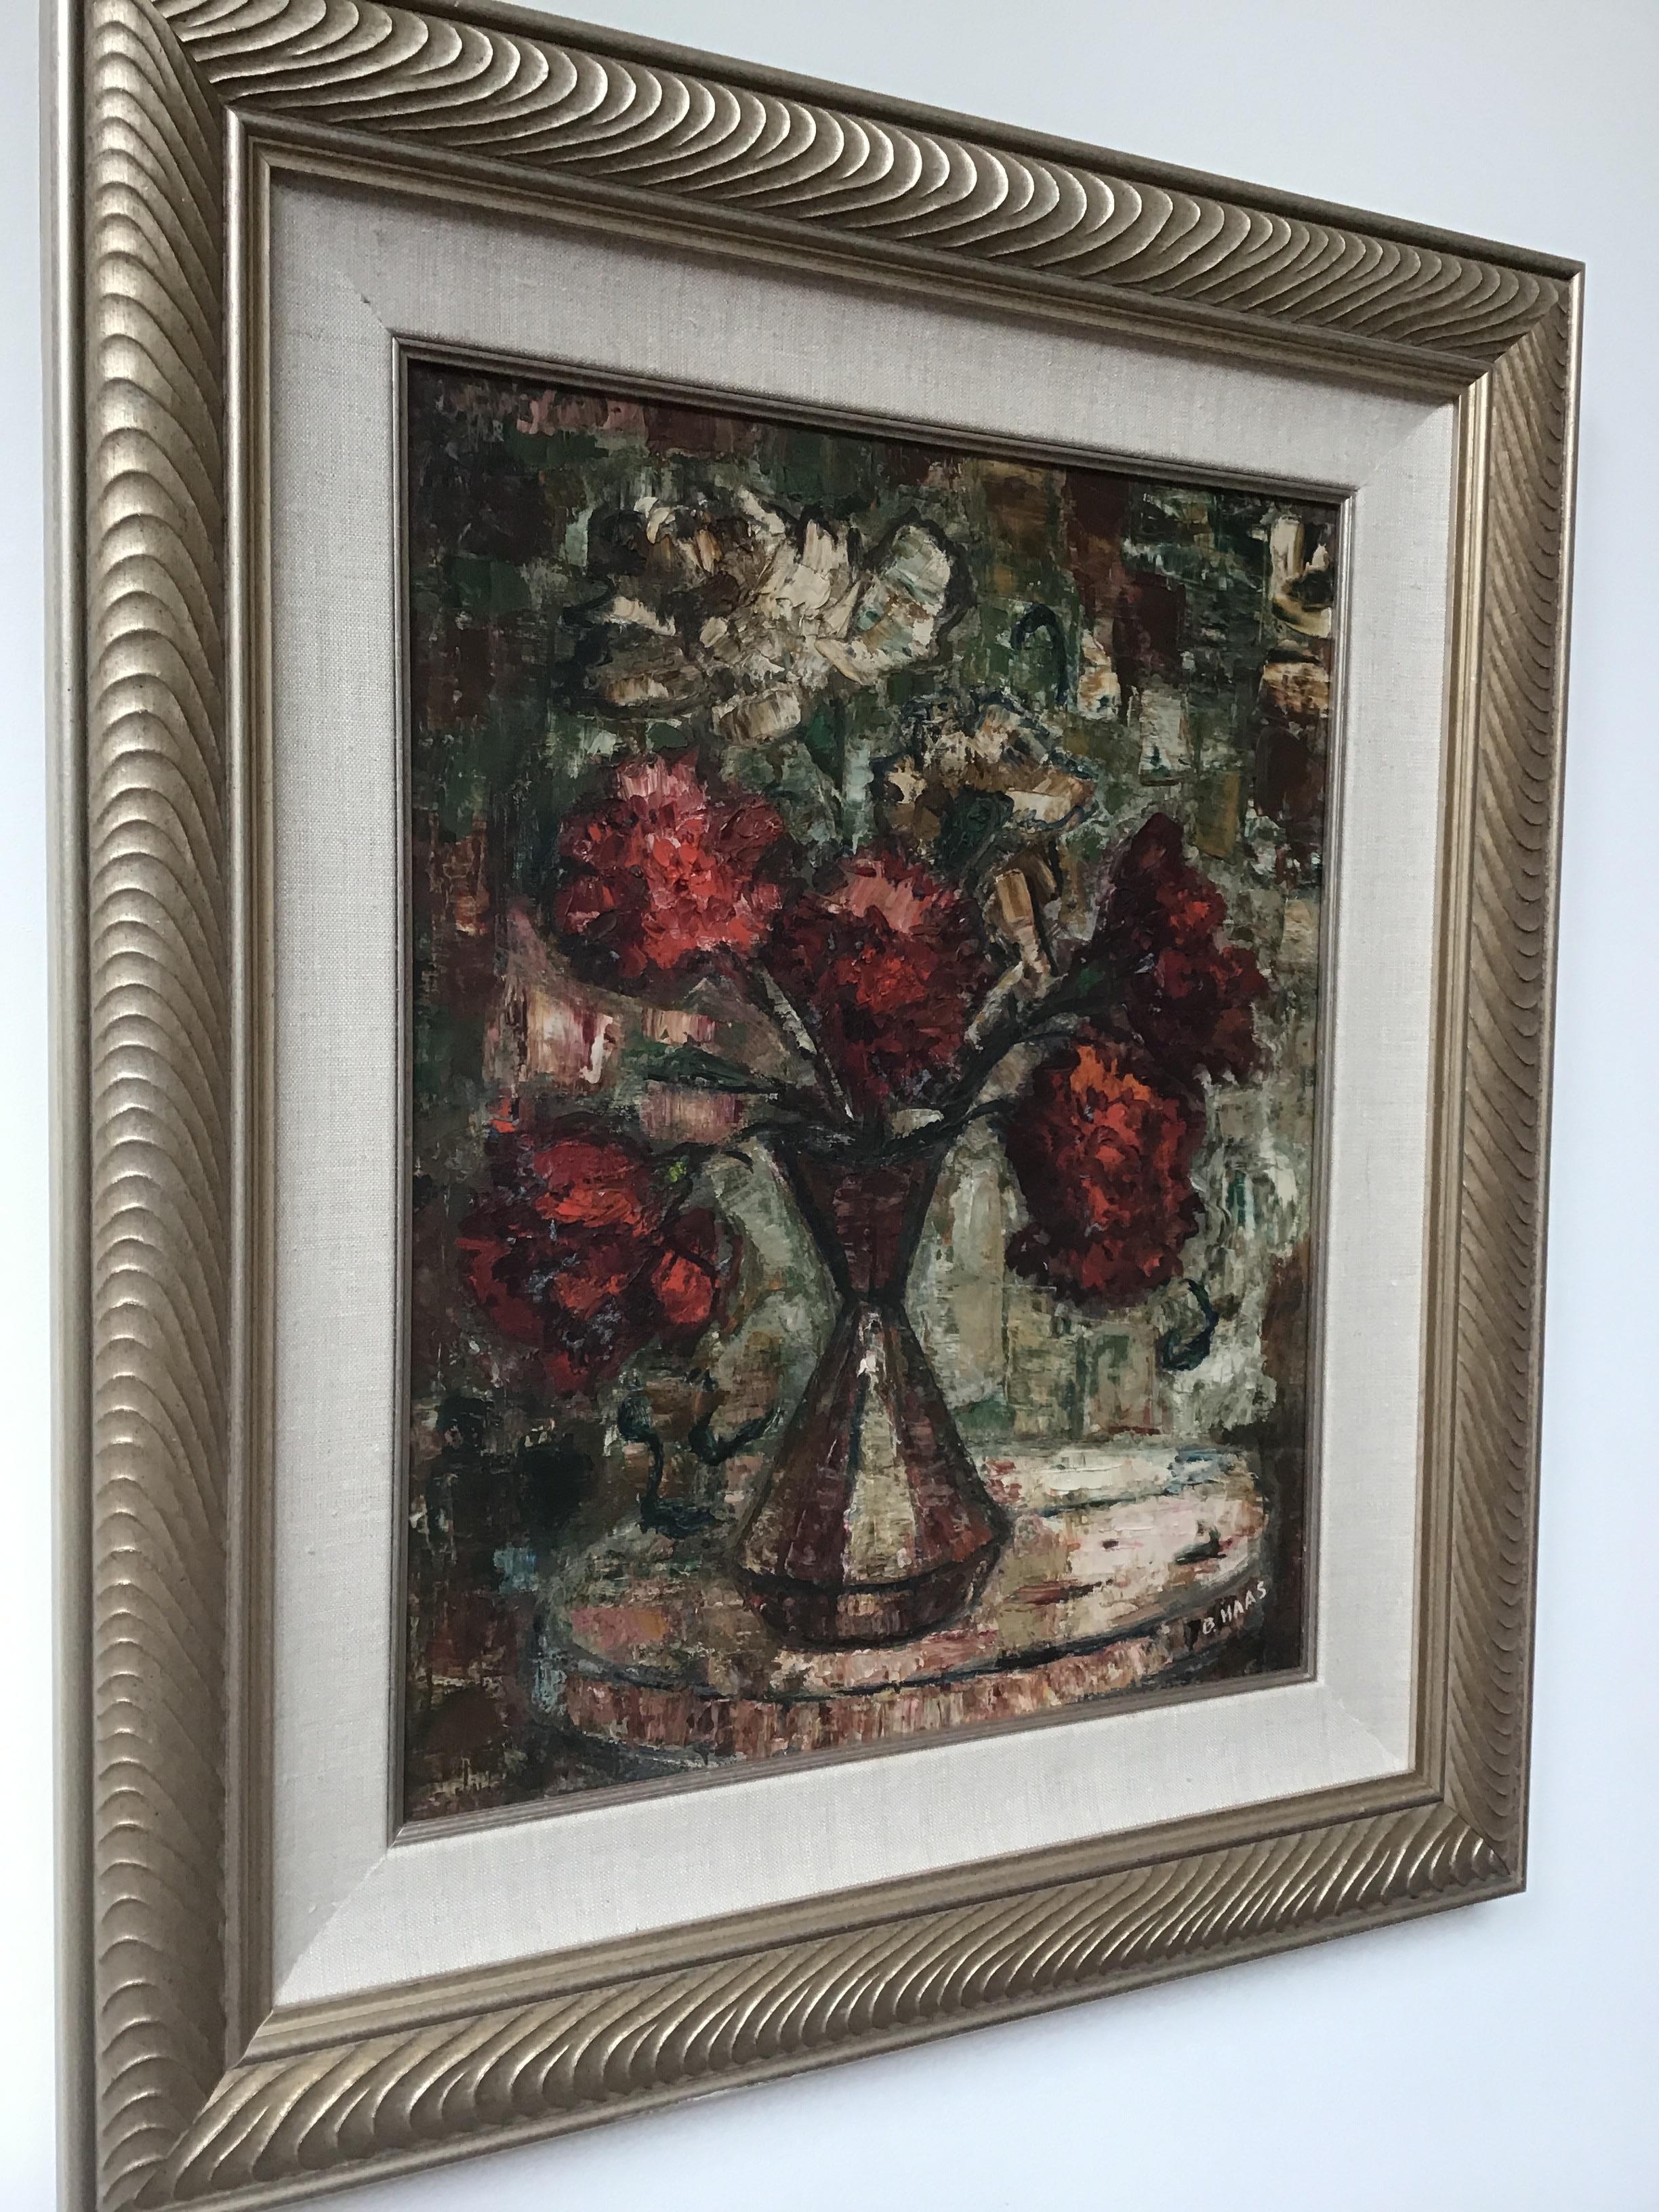 1990s oil on canvas of floral arrangement by B. Haas.